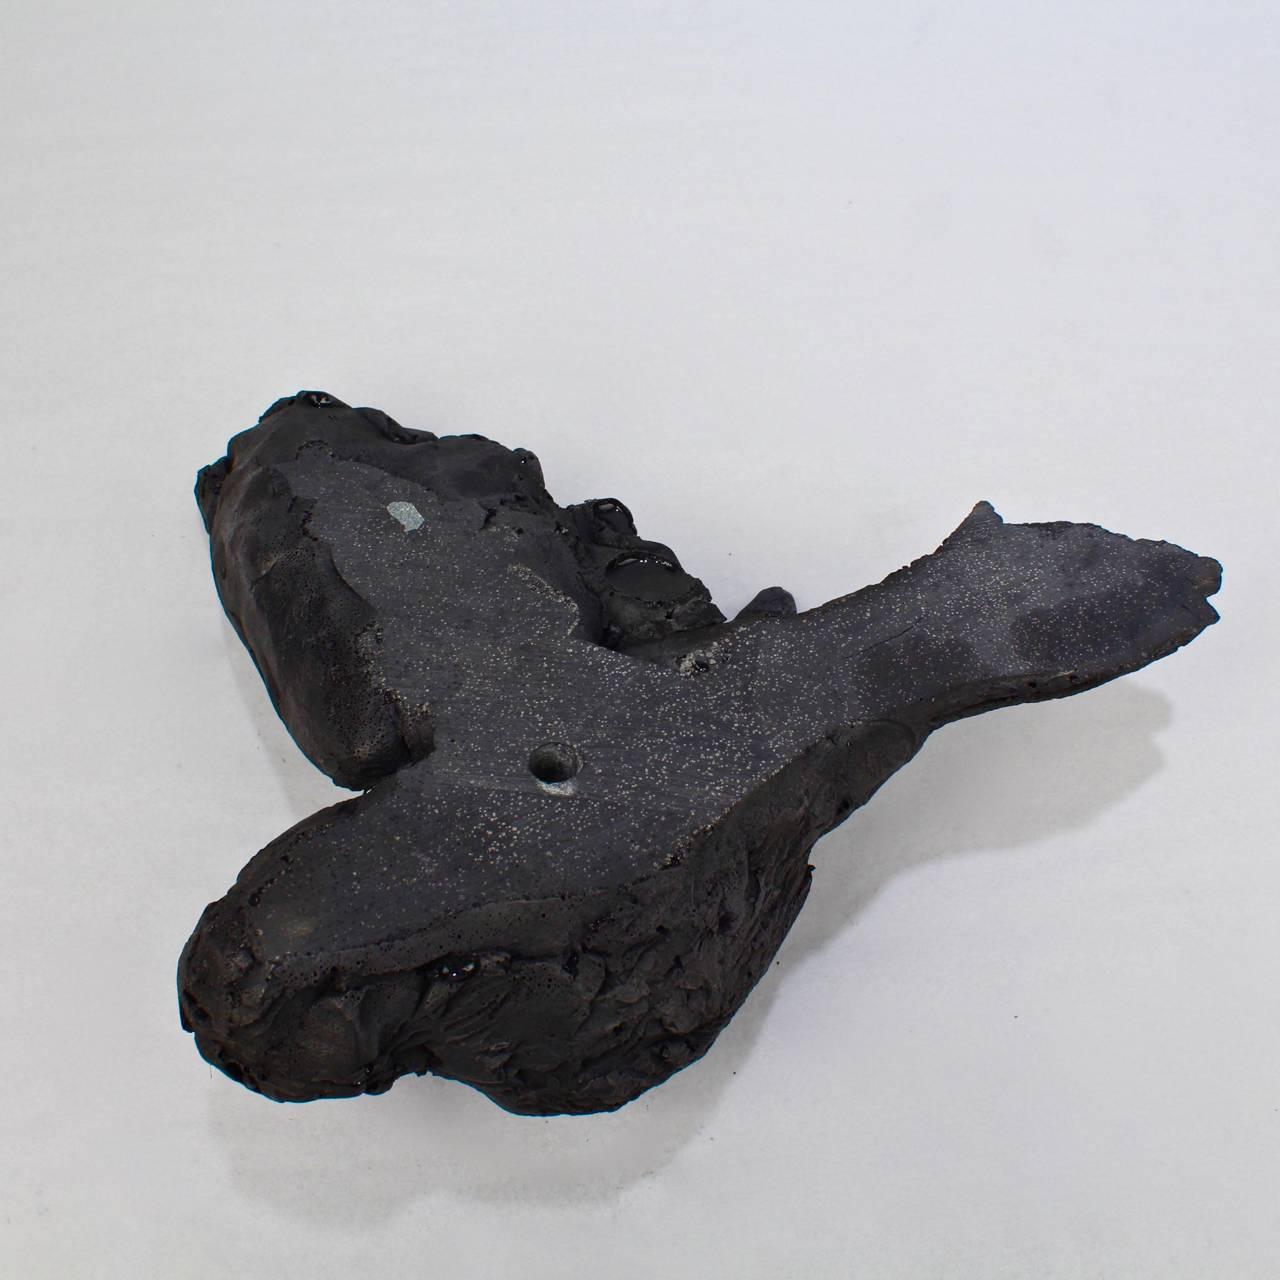 We All Fall Down II, Black Gesso Resin Sculpture of a Bird by Darla Jackson 1